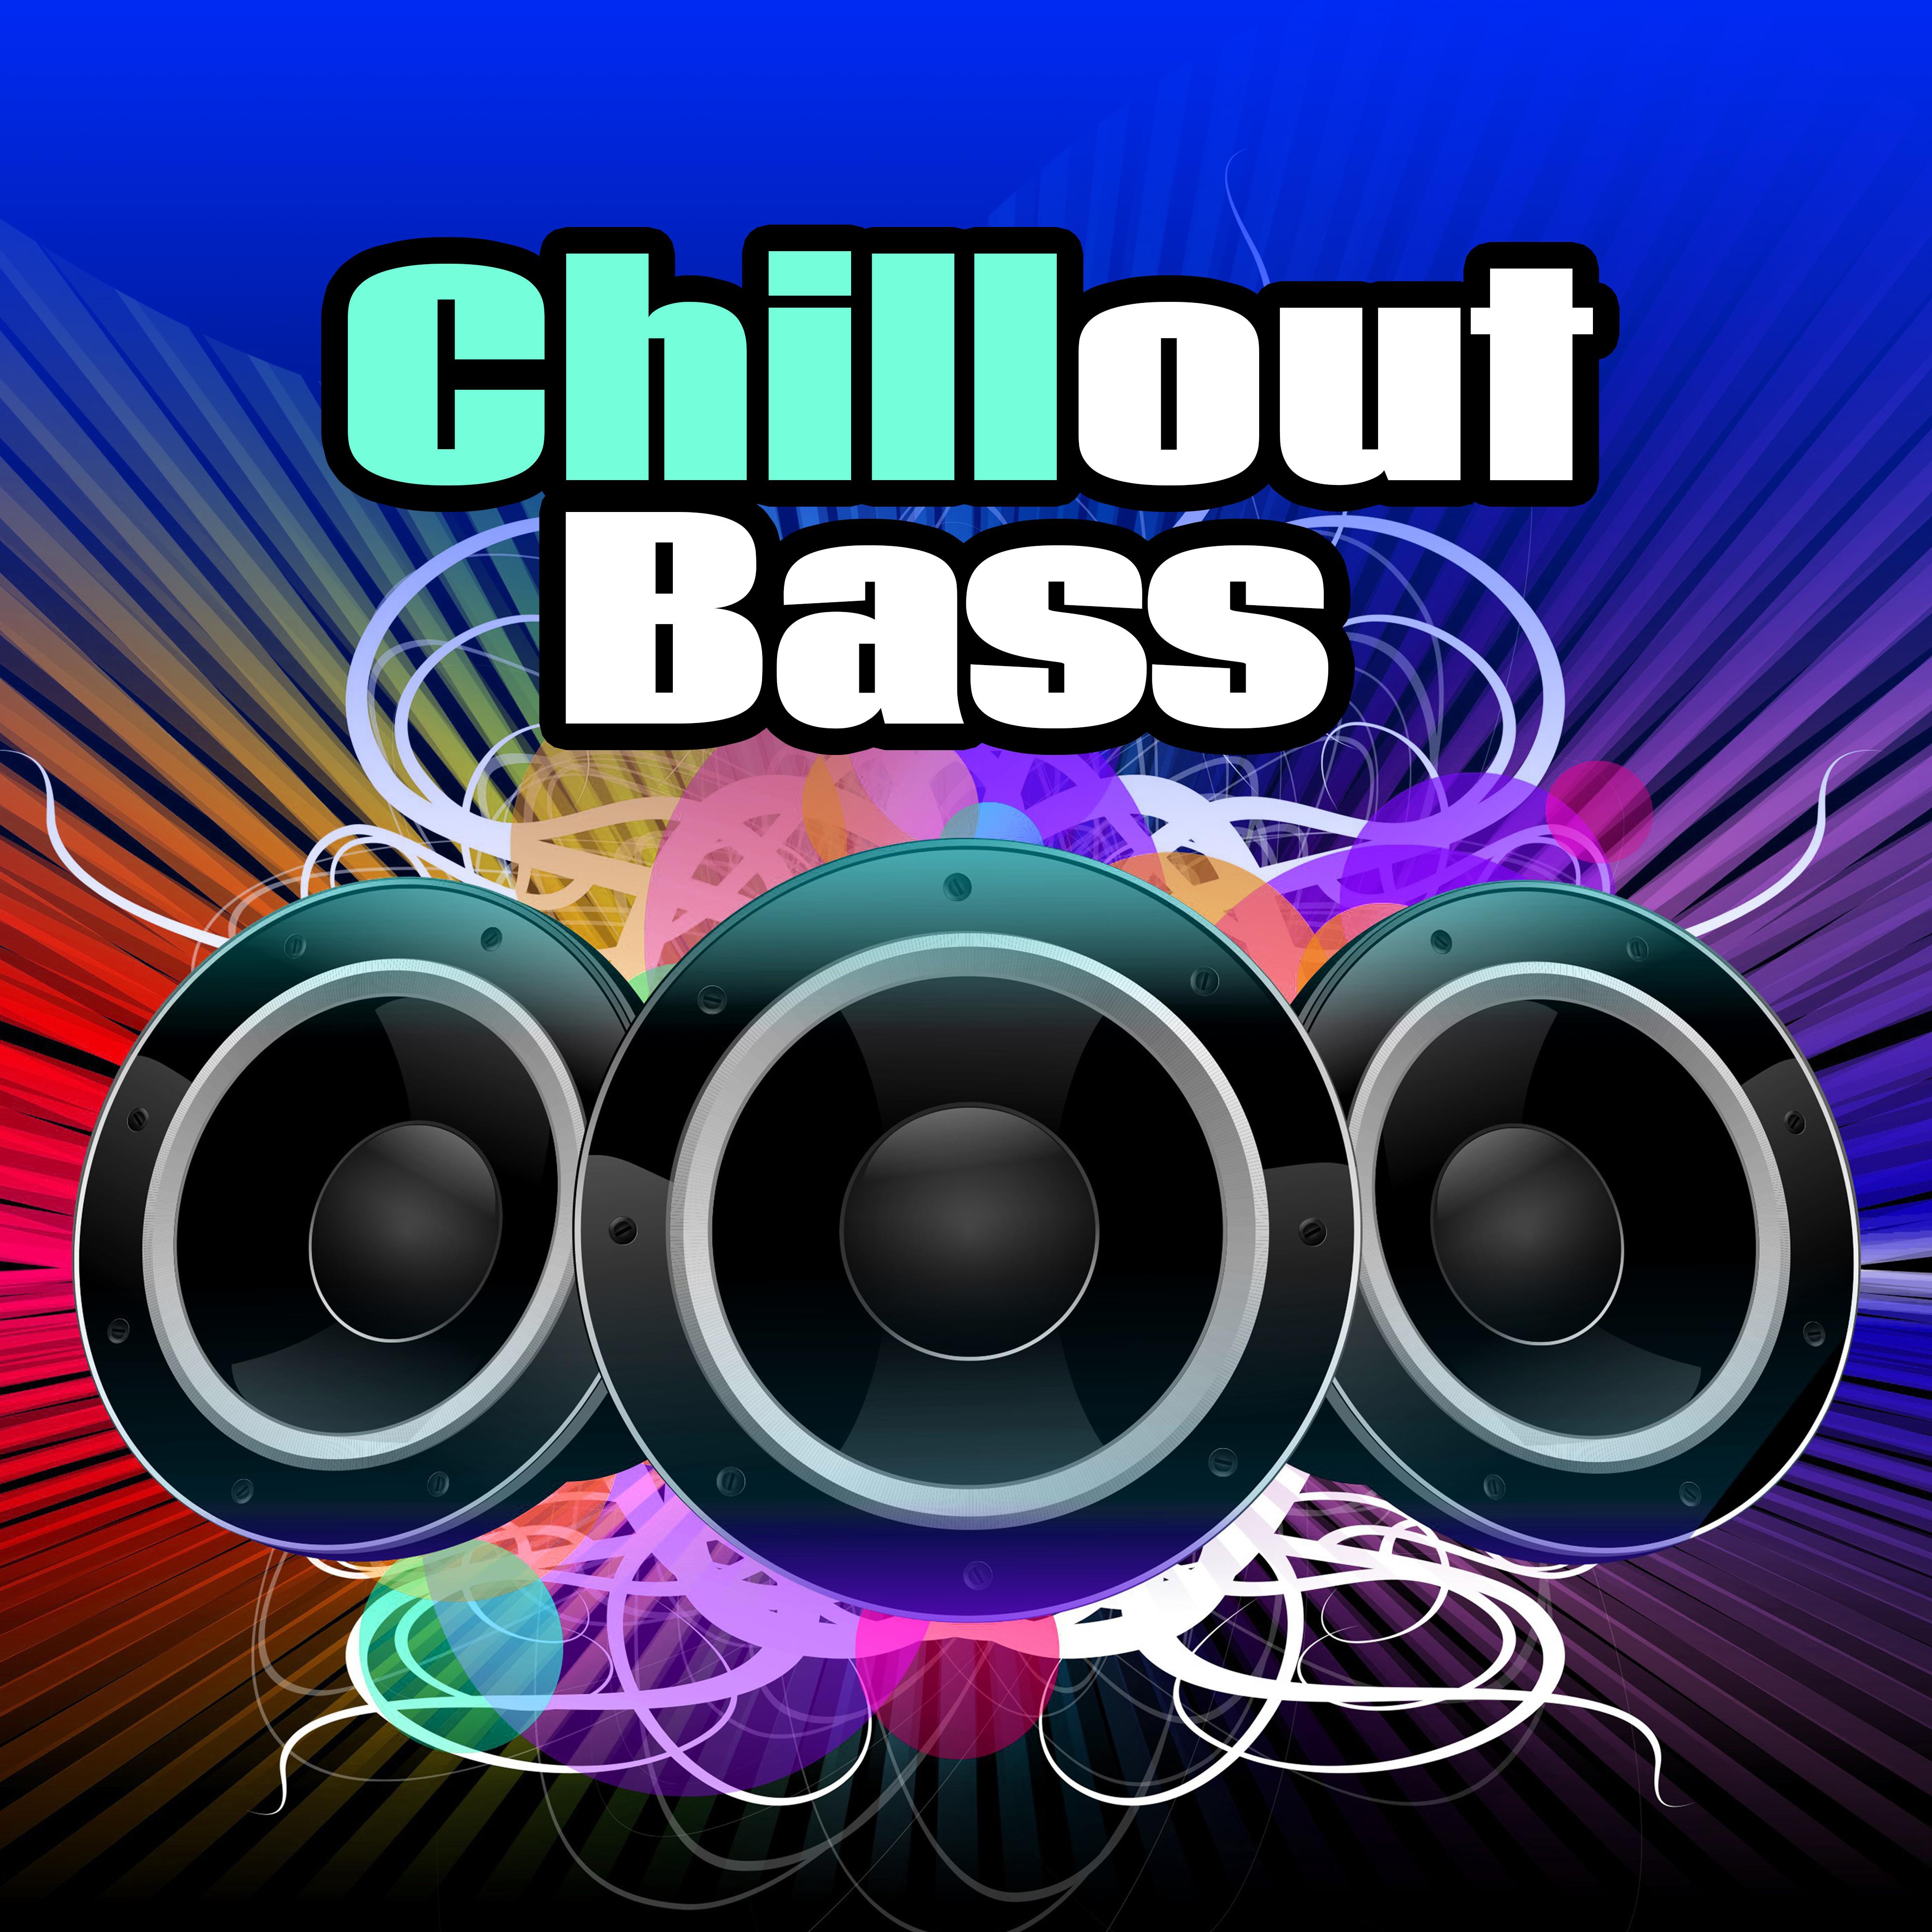 Chillout Bass – Chillout Downbeats, Electronic Vibes, Ambient Music, Chillout Session